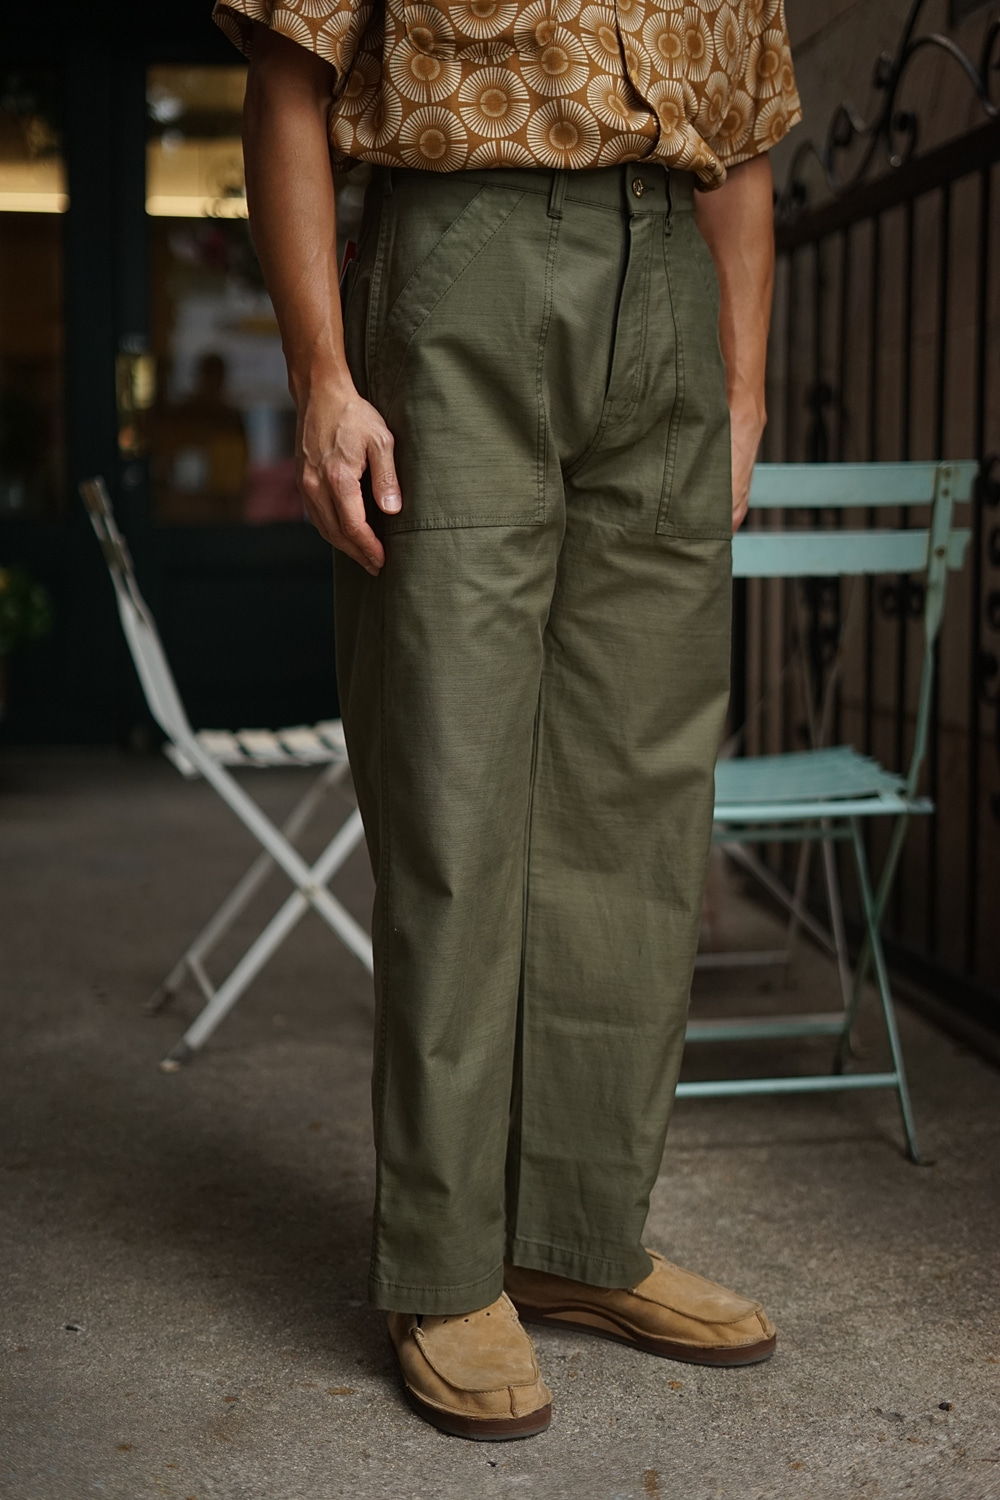 WIDE FATIGUE PANTS OLIVE T02UNIVERSAL OVERALL(유니버셜 오버롤)